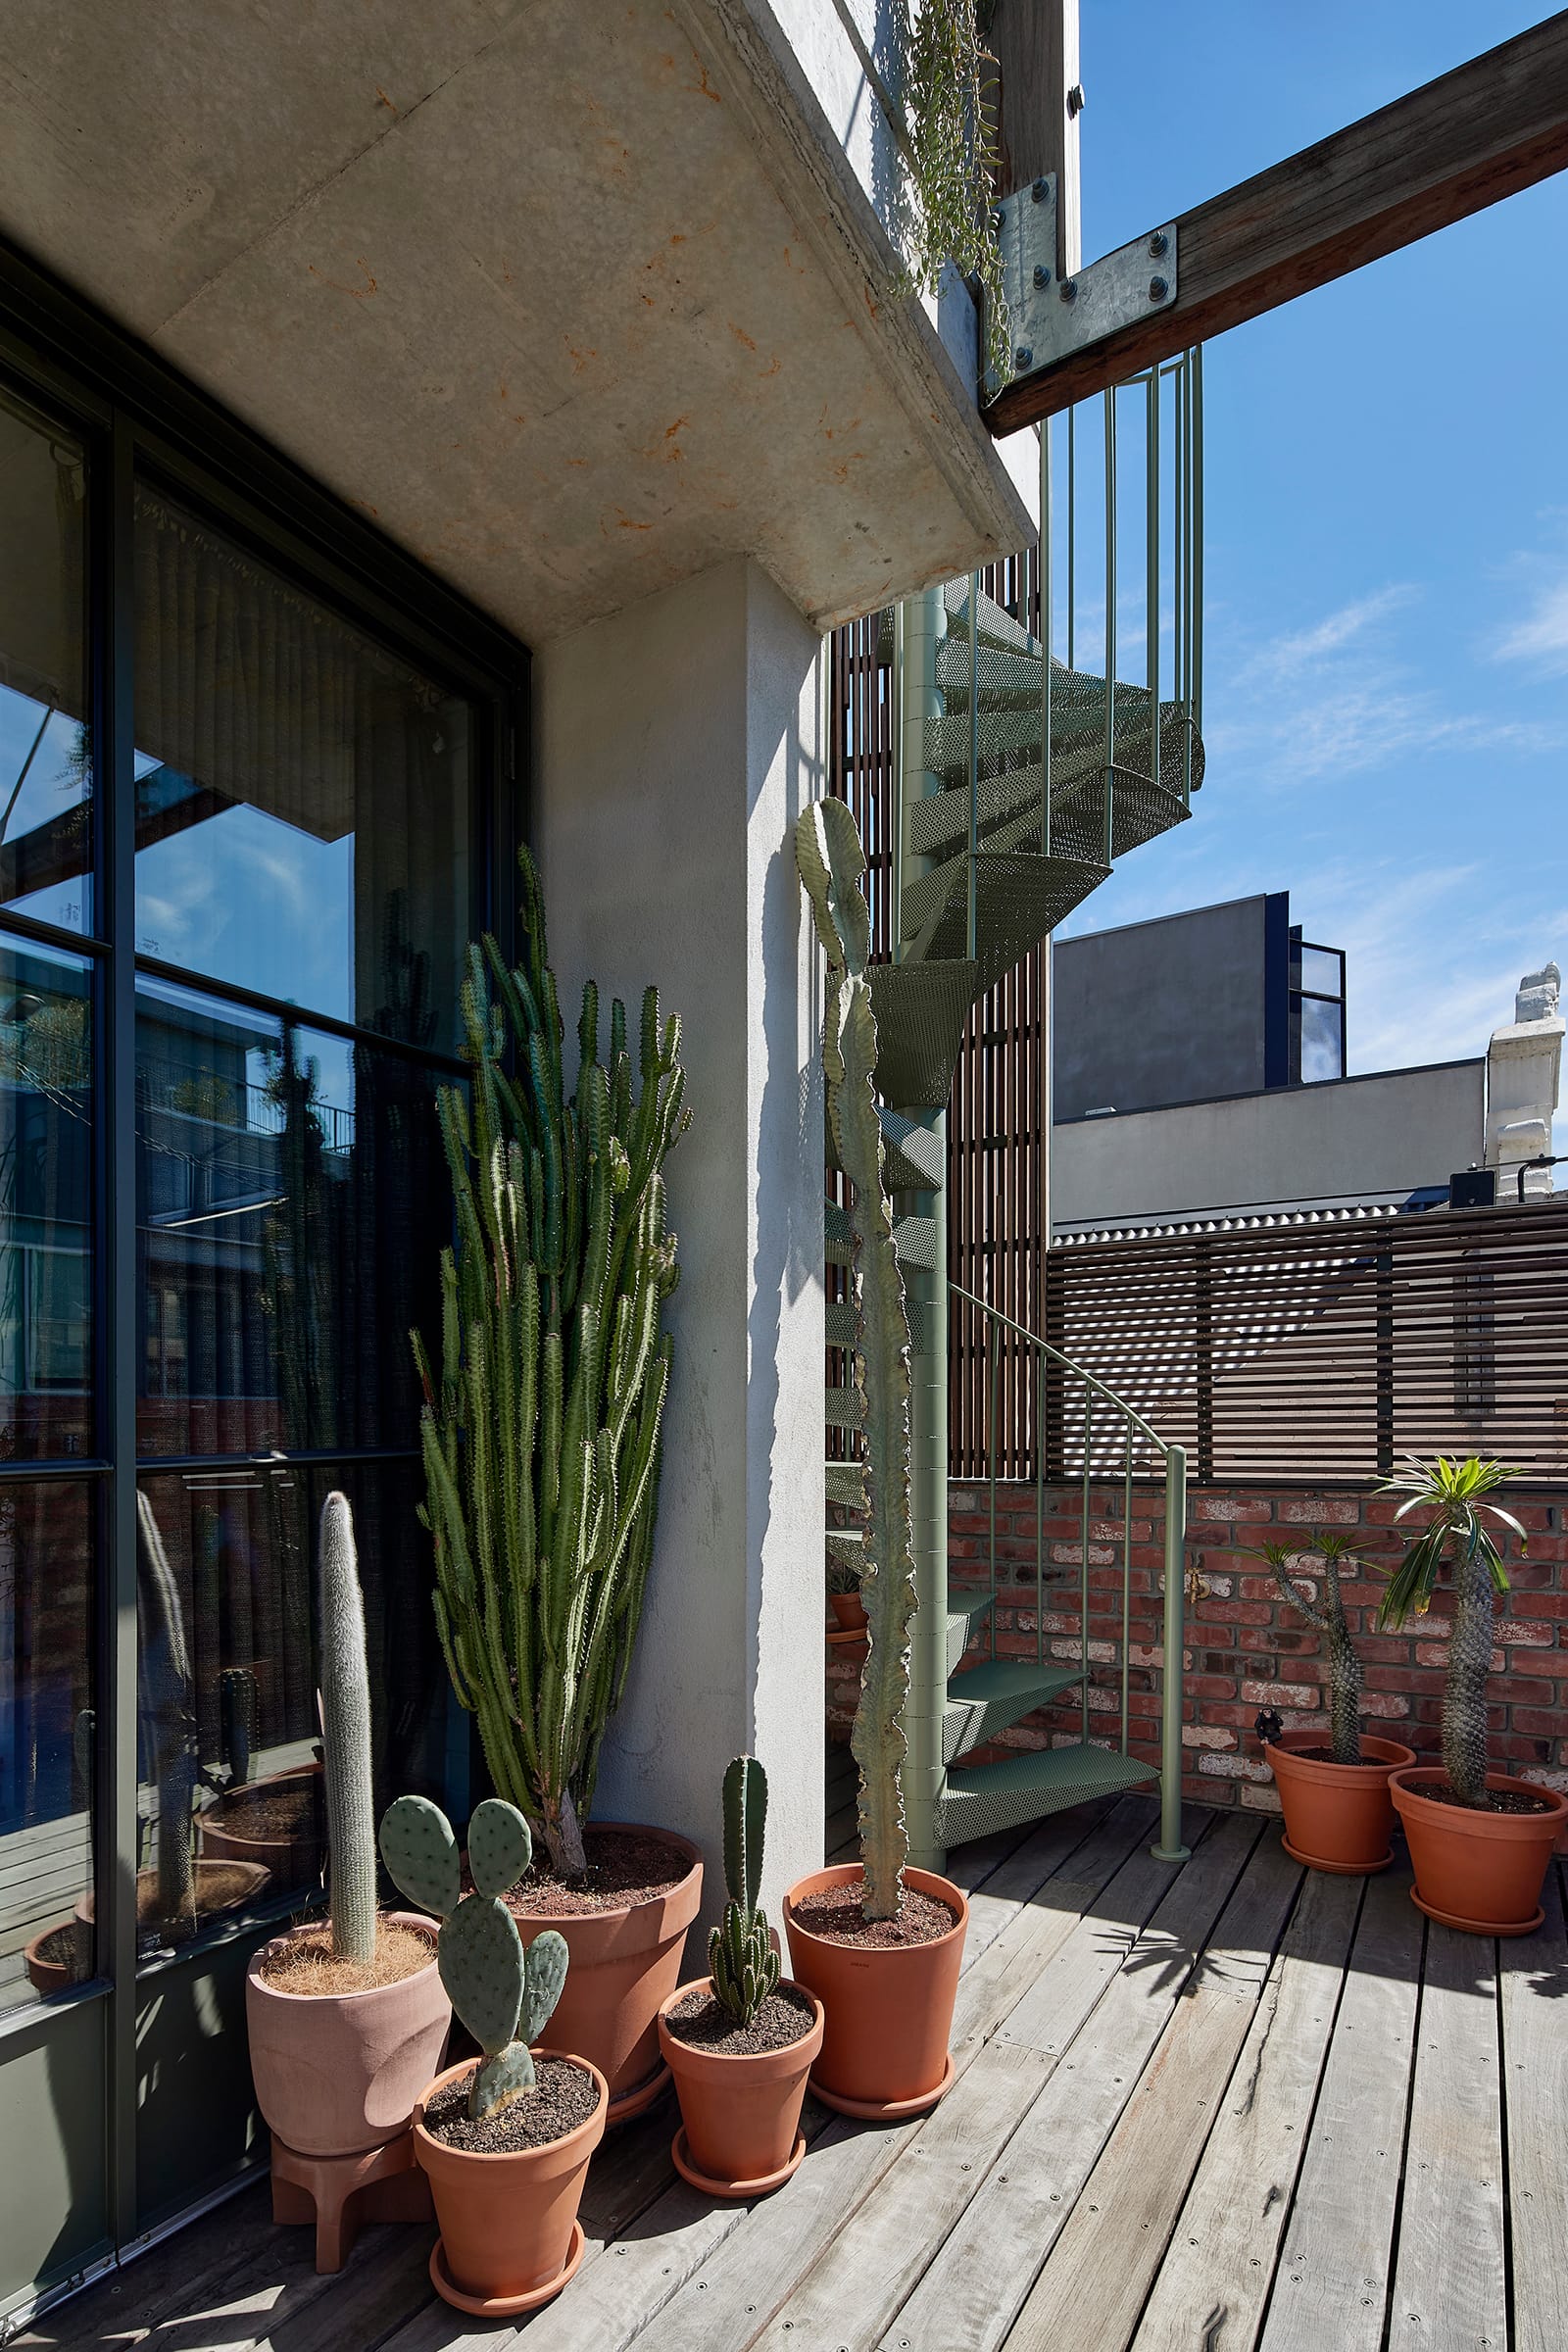 Fabrica by mcmahon and nerlich. Photography by Shannon McGrath. Outdoor terrace with weathered timber floors and arrangement of cactus pots. Green metal staircase in background leading to above level. Red brick wall.